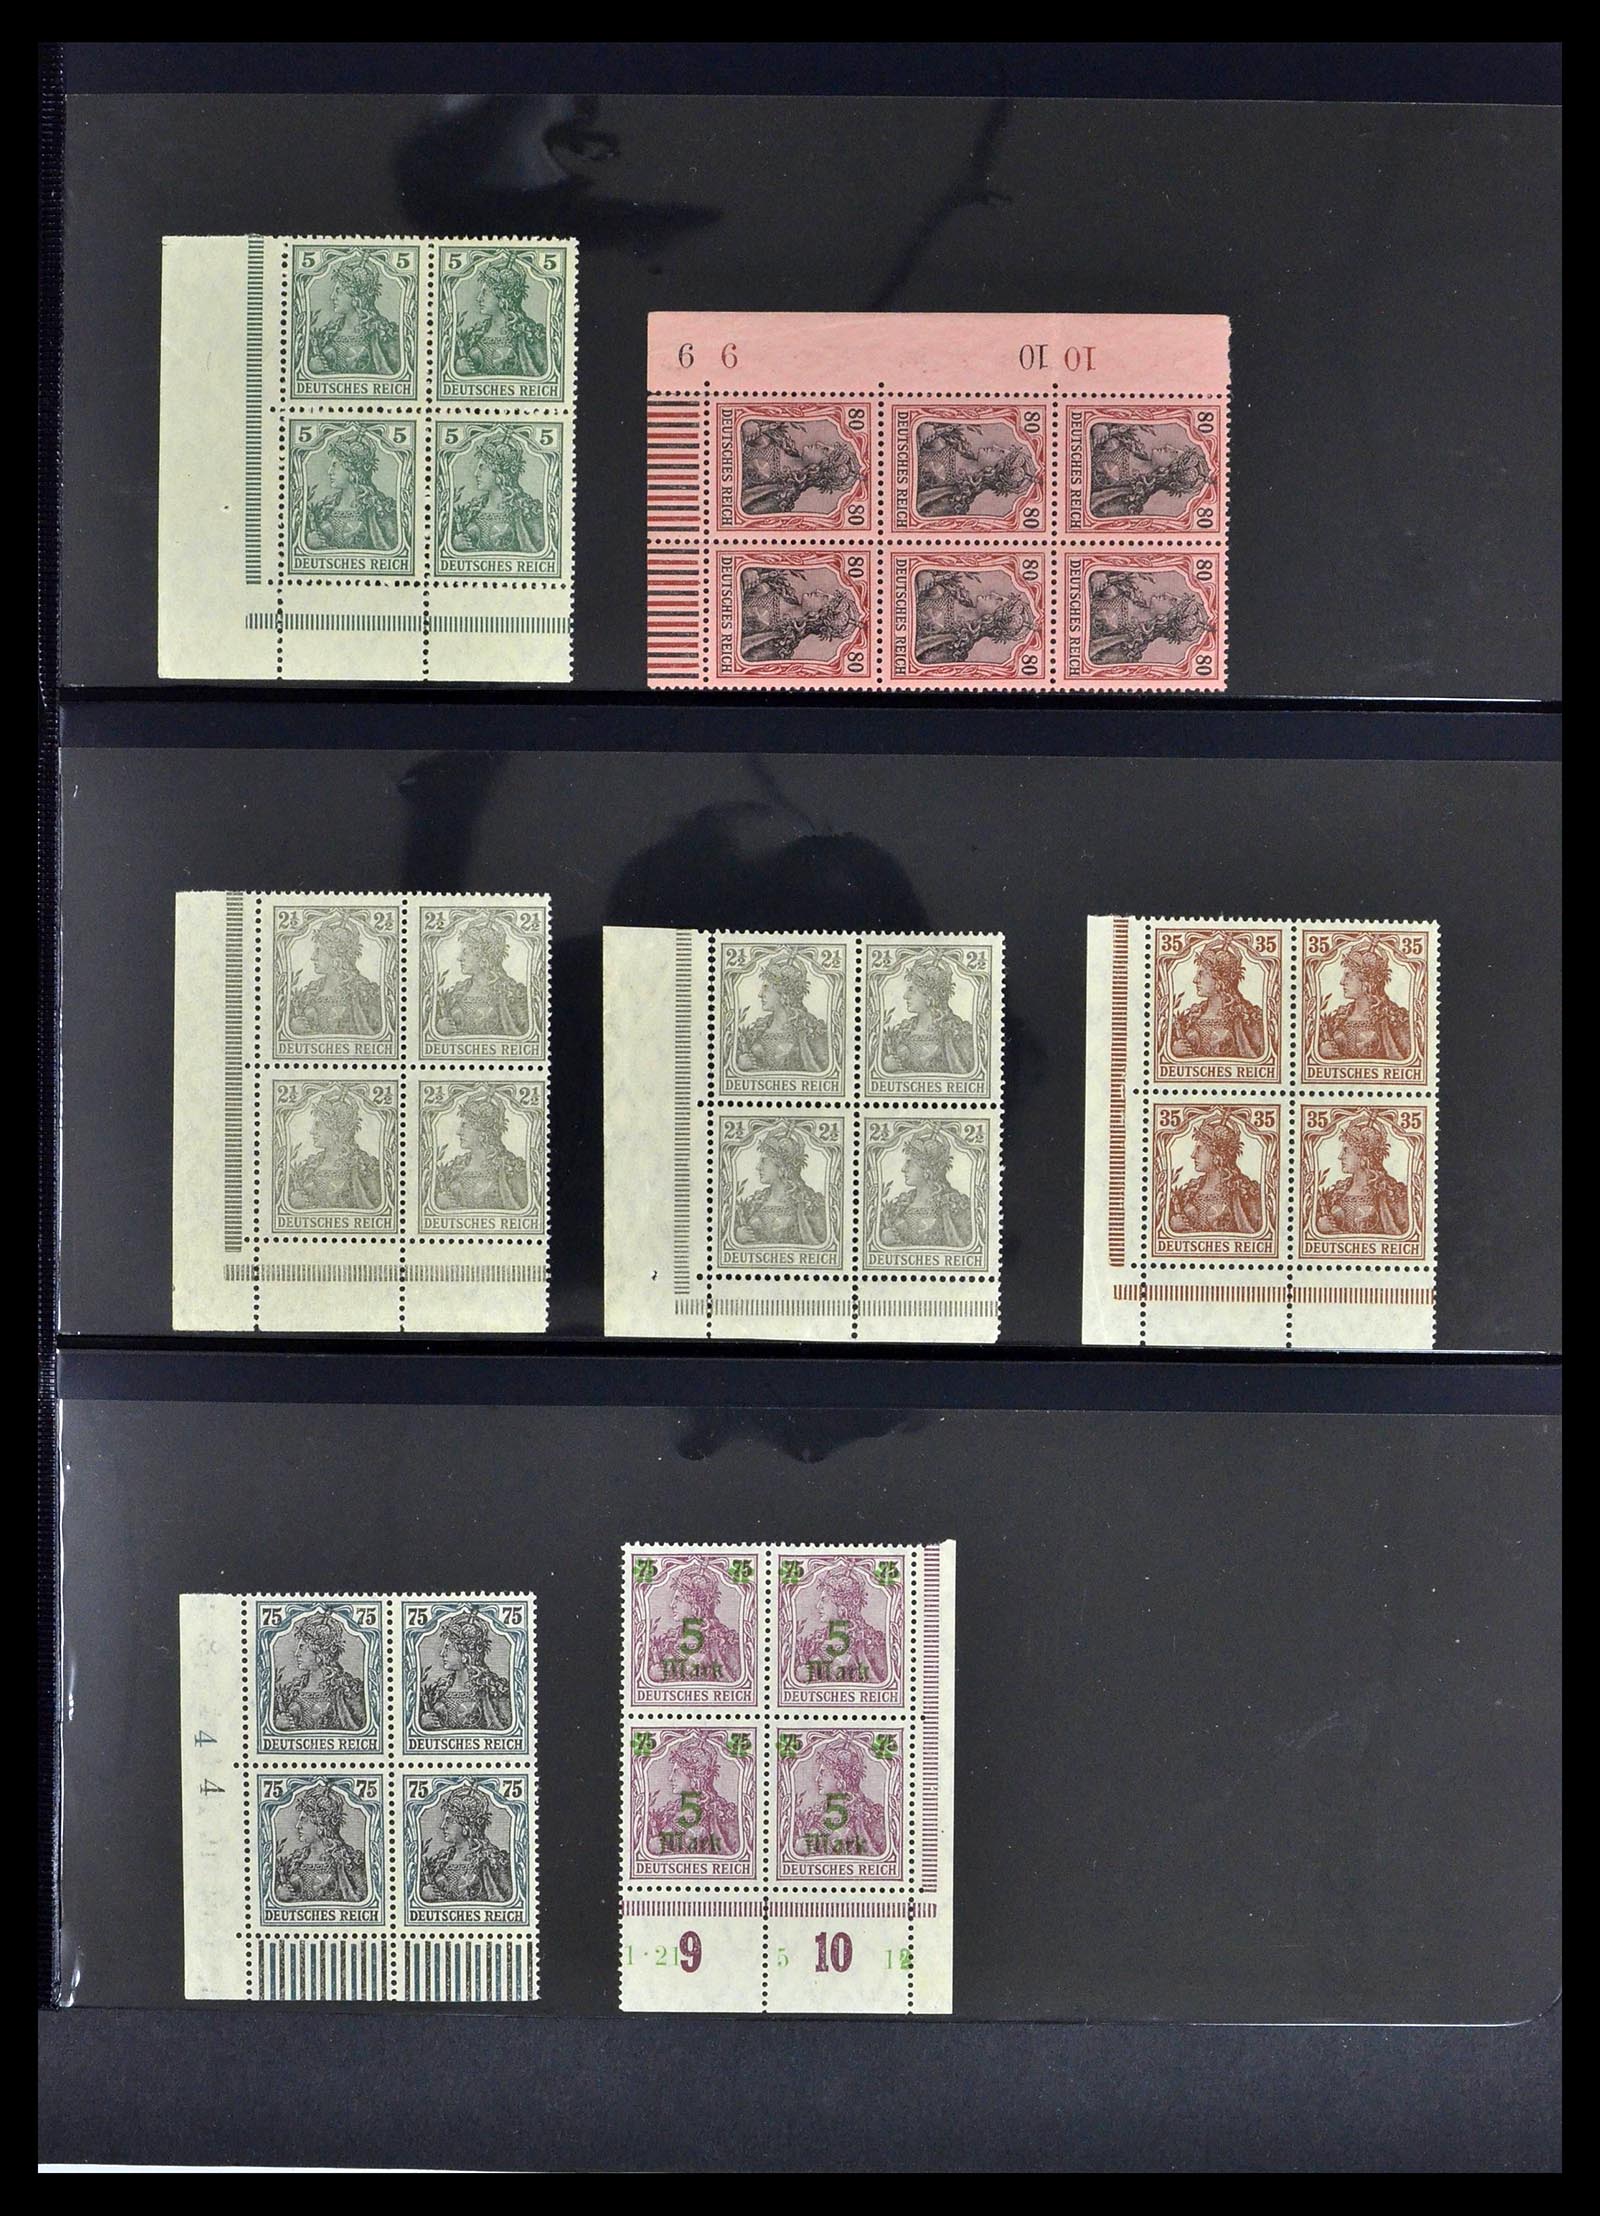 39255 0035 - Stamp collection 39255 German Reich MNH blocks of 4.